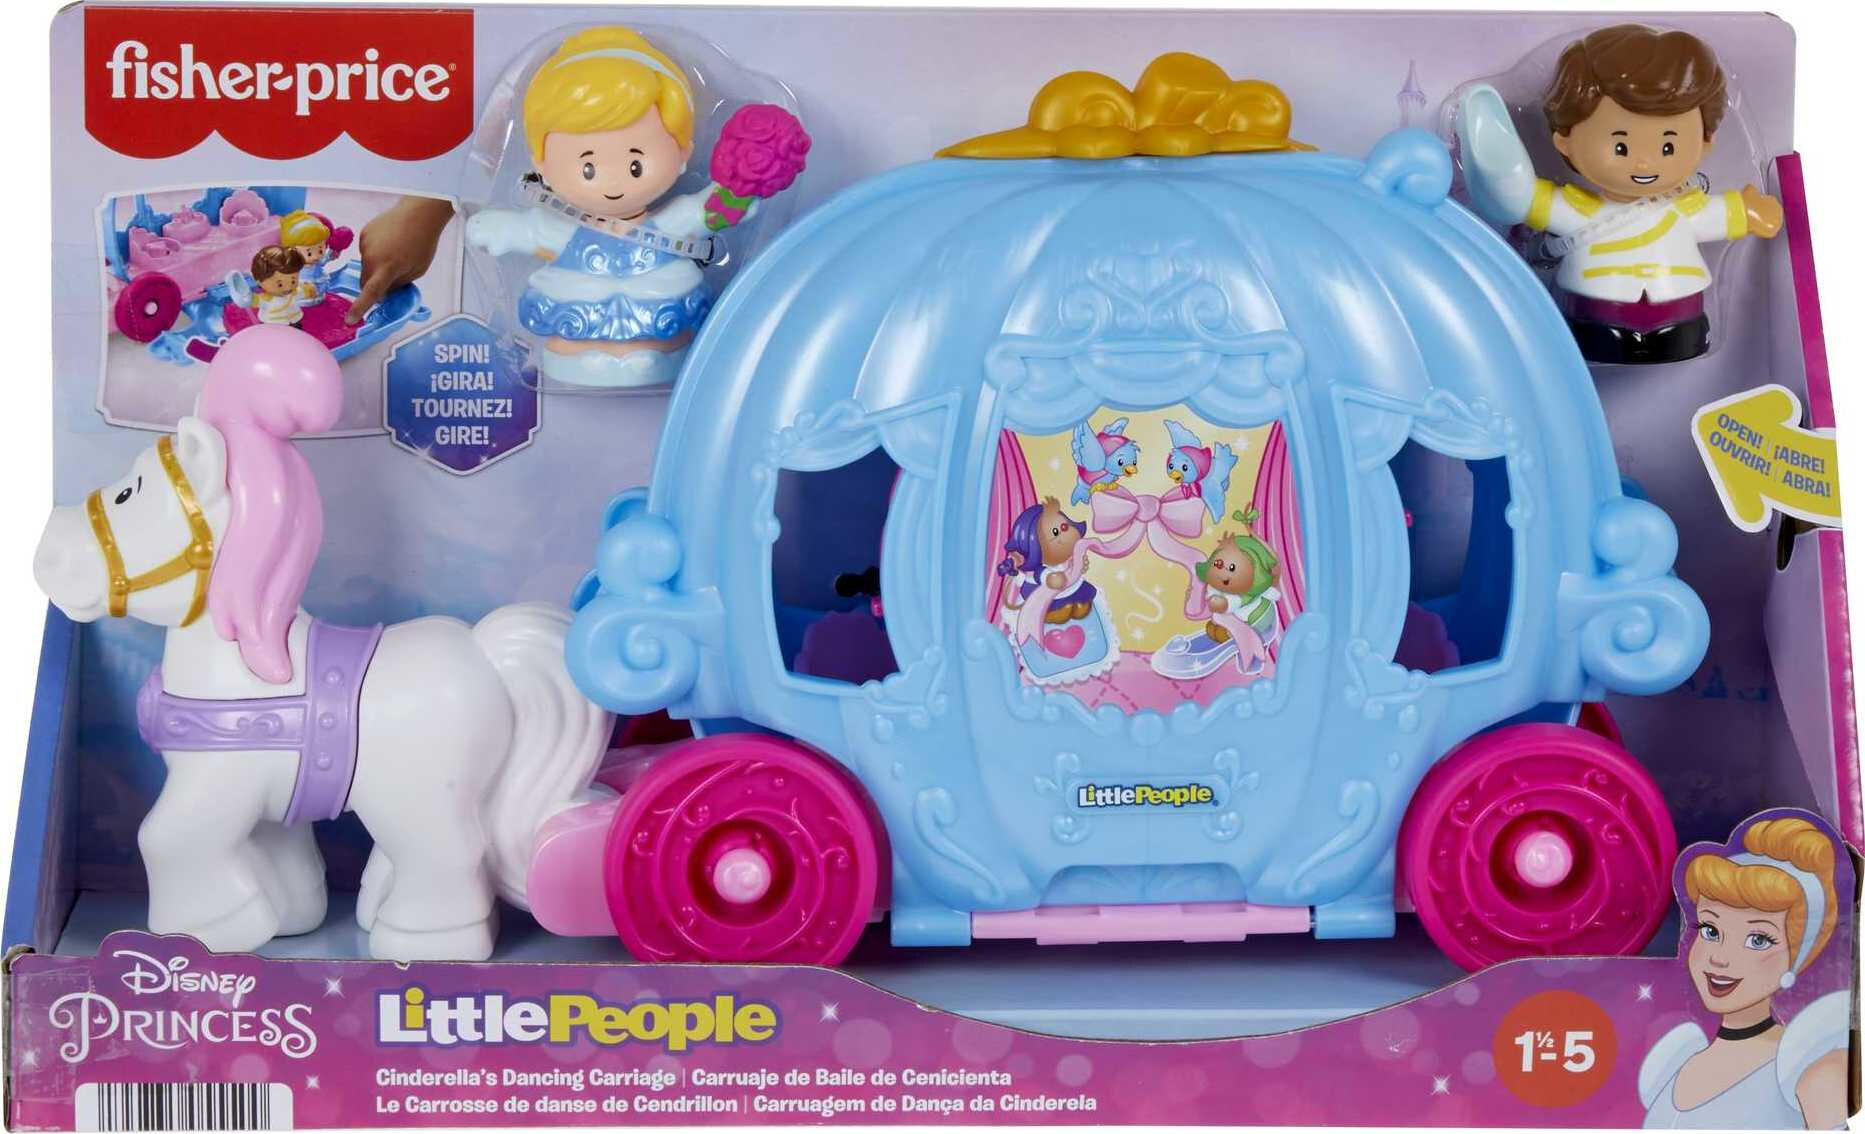 Disney Princess Cinderella’s Dancing Carriage Little People Toddler Playset with Horse & Figures - image 6 of 6